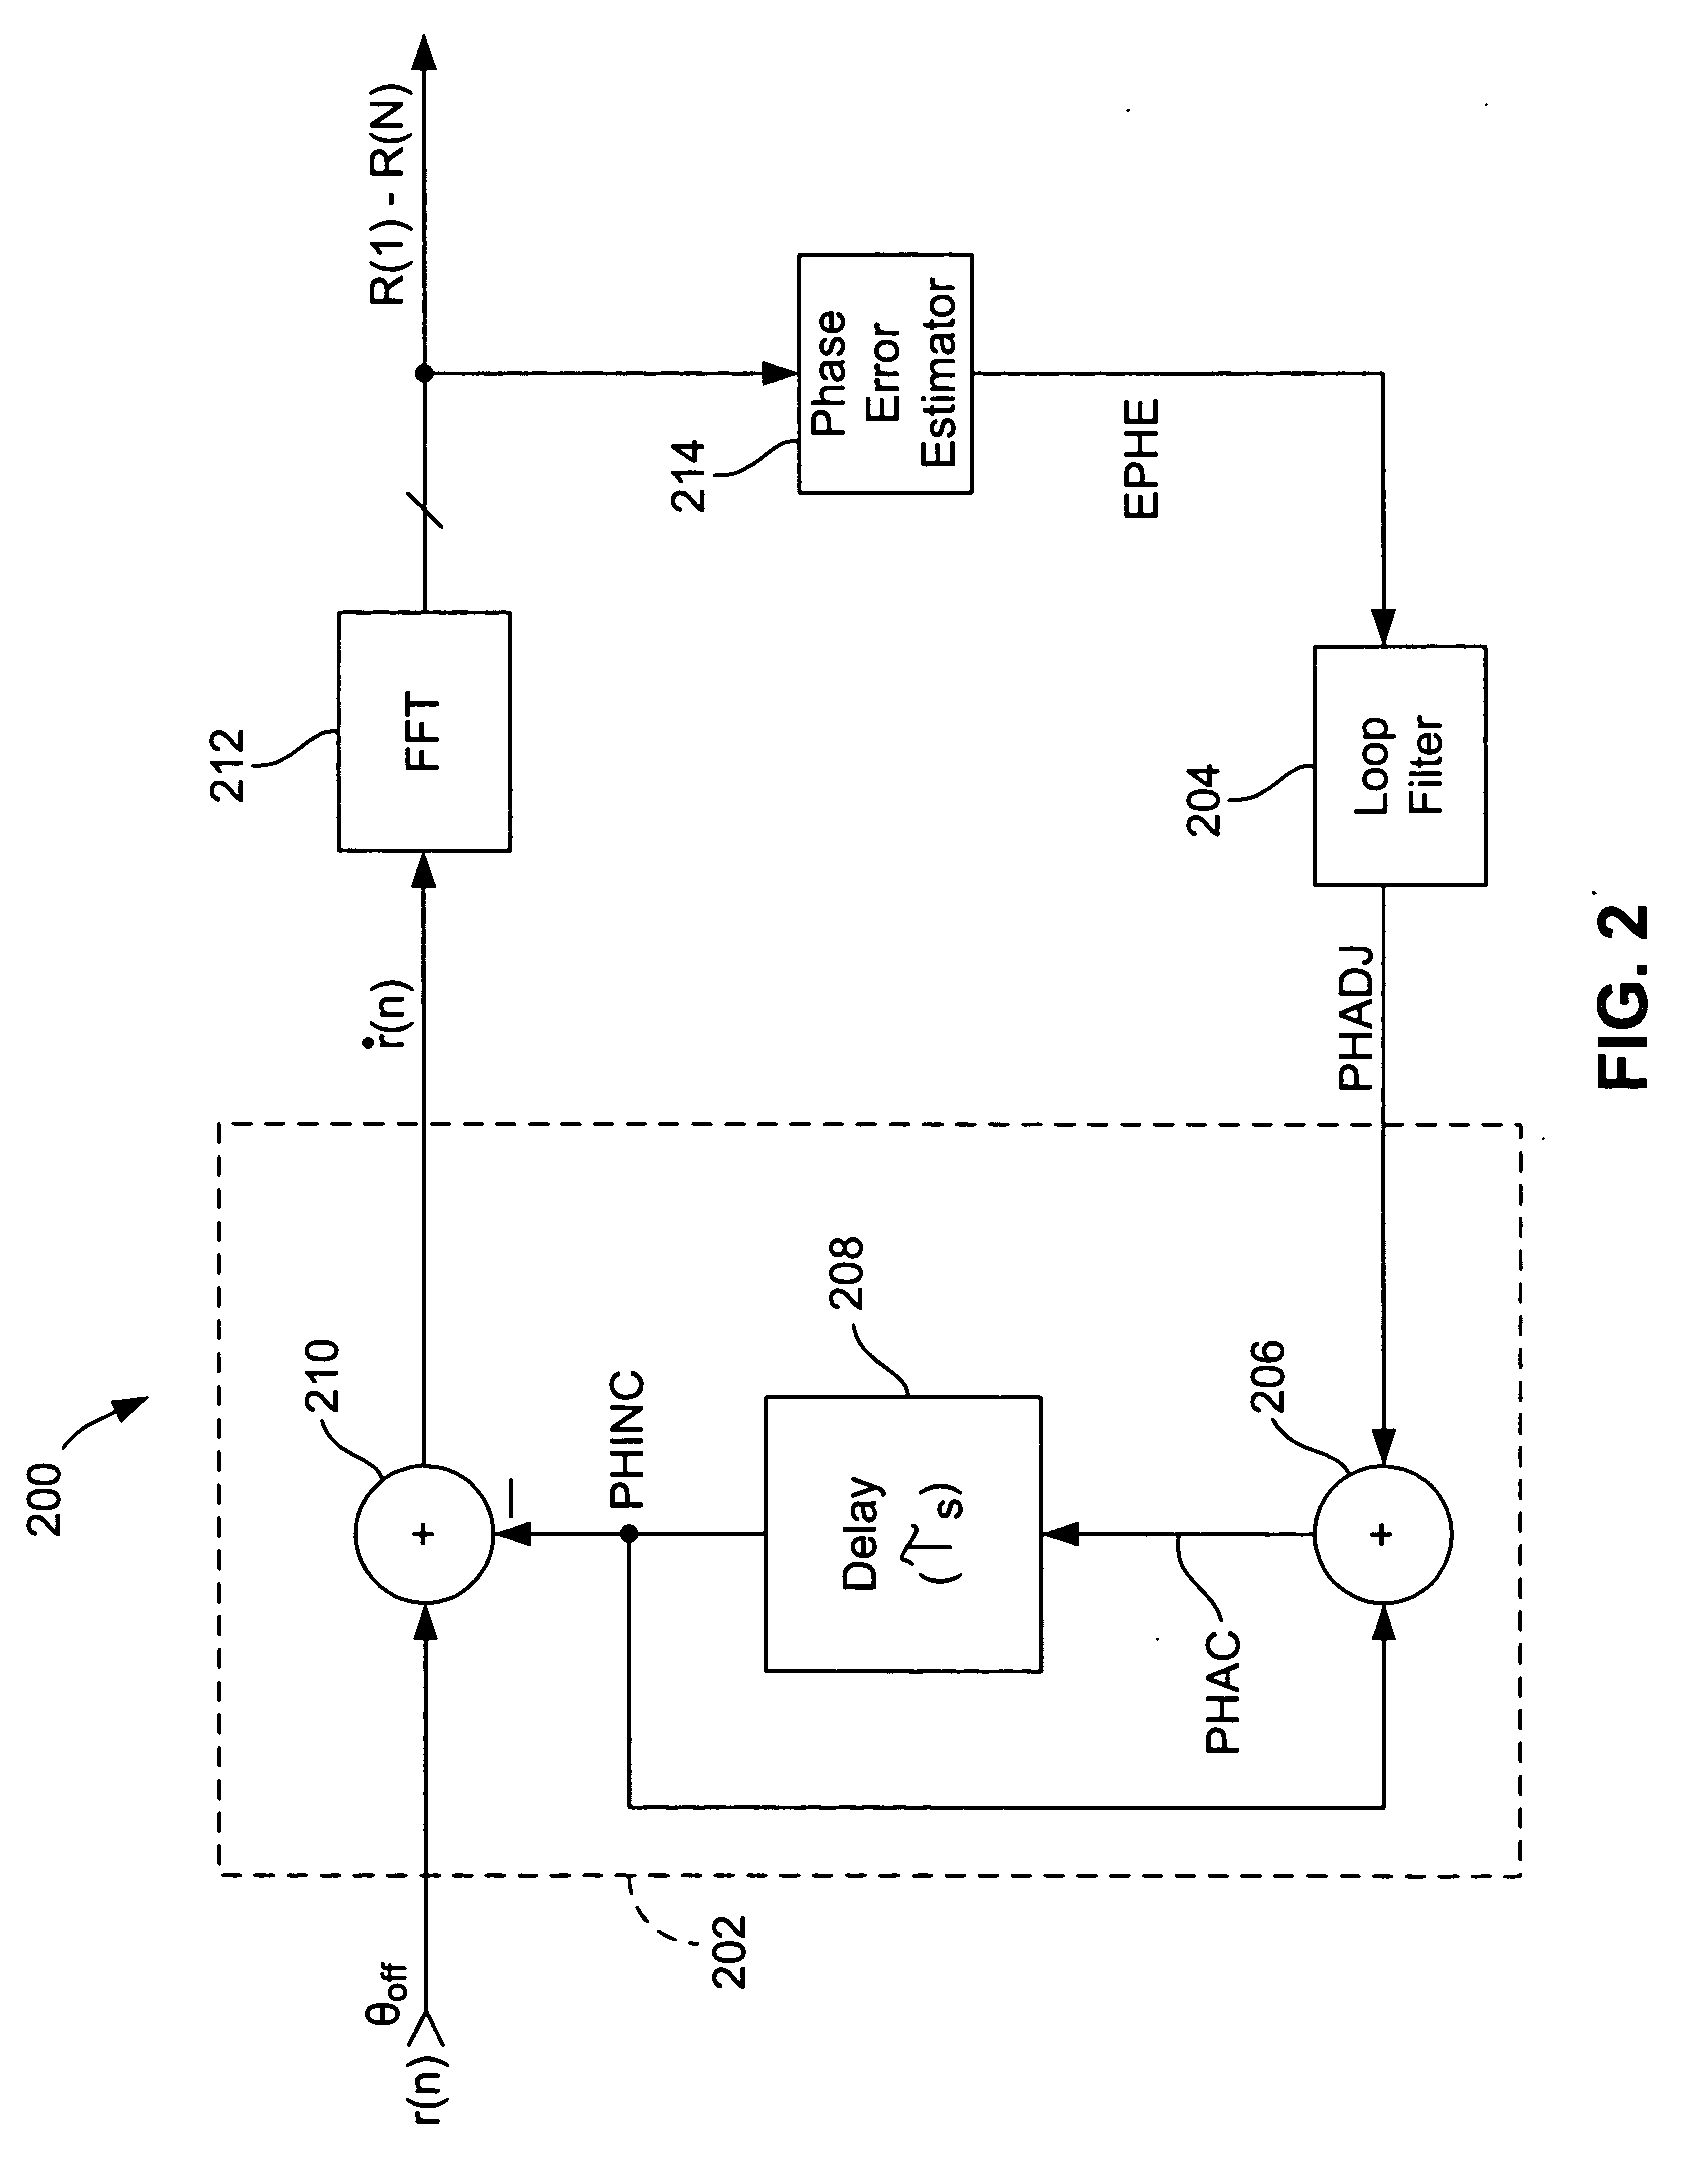 Carrier tracking circuit and method including dual numerically controlled oscillators and feedforward phase correction coefficient